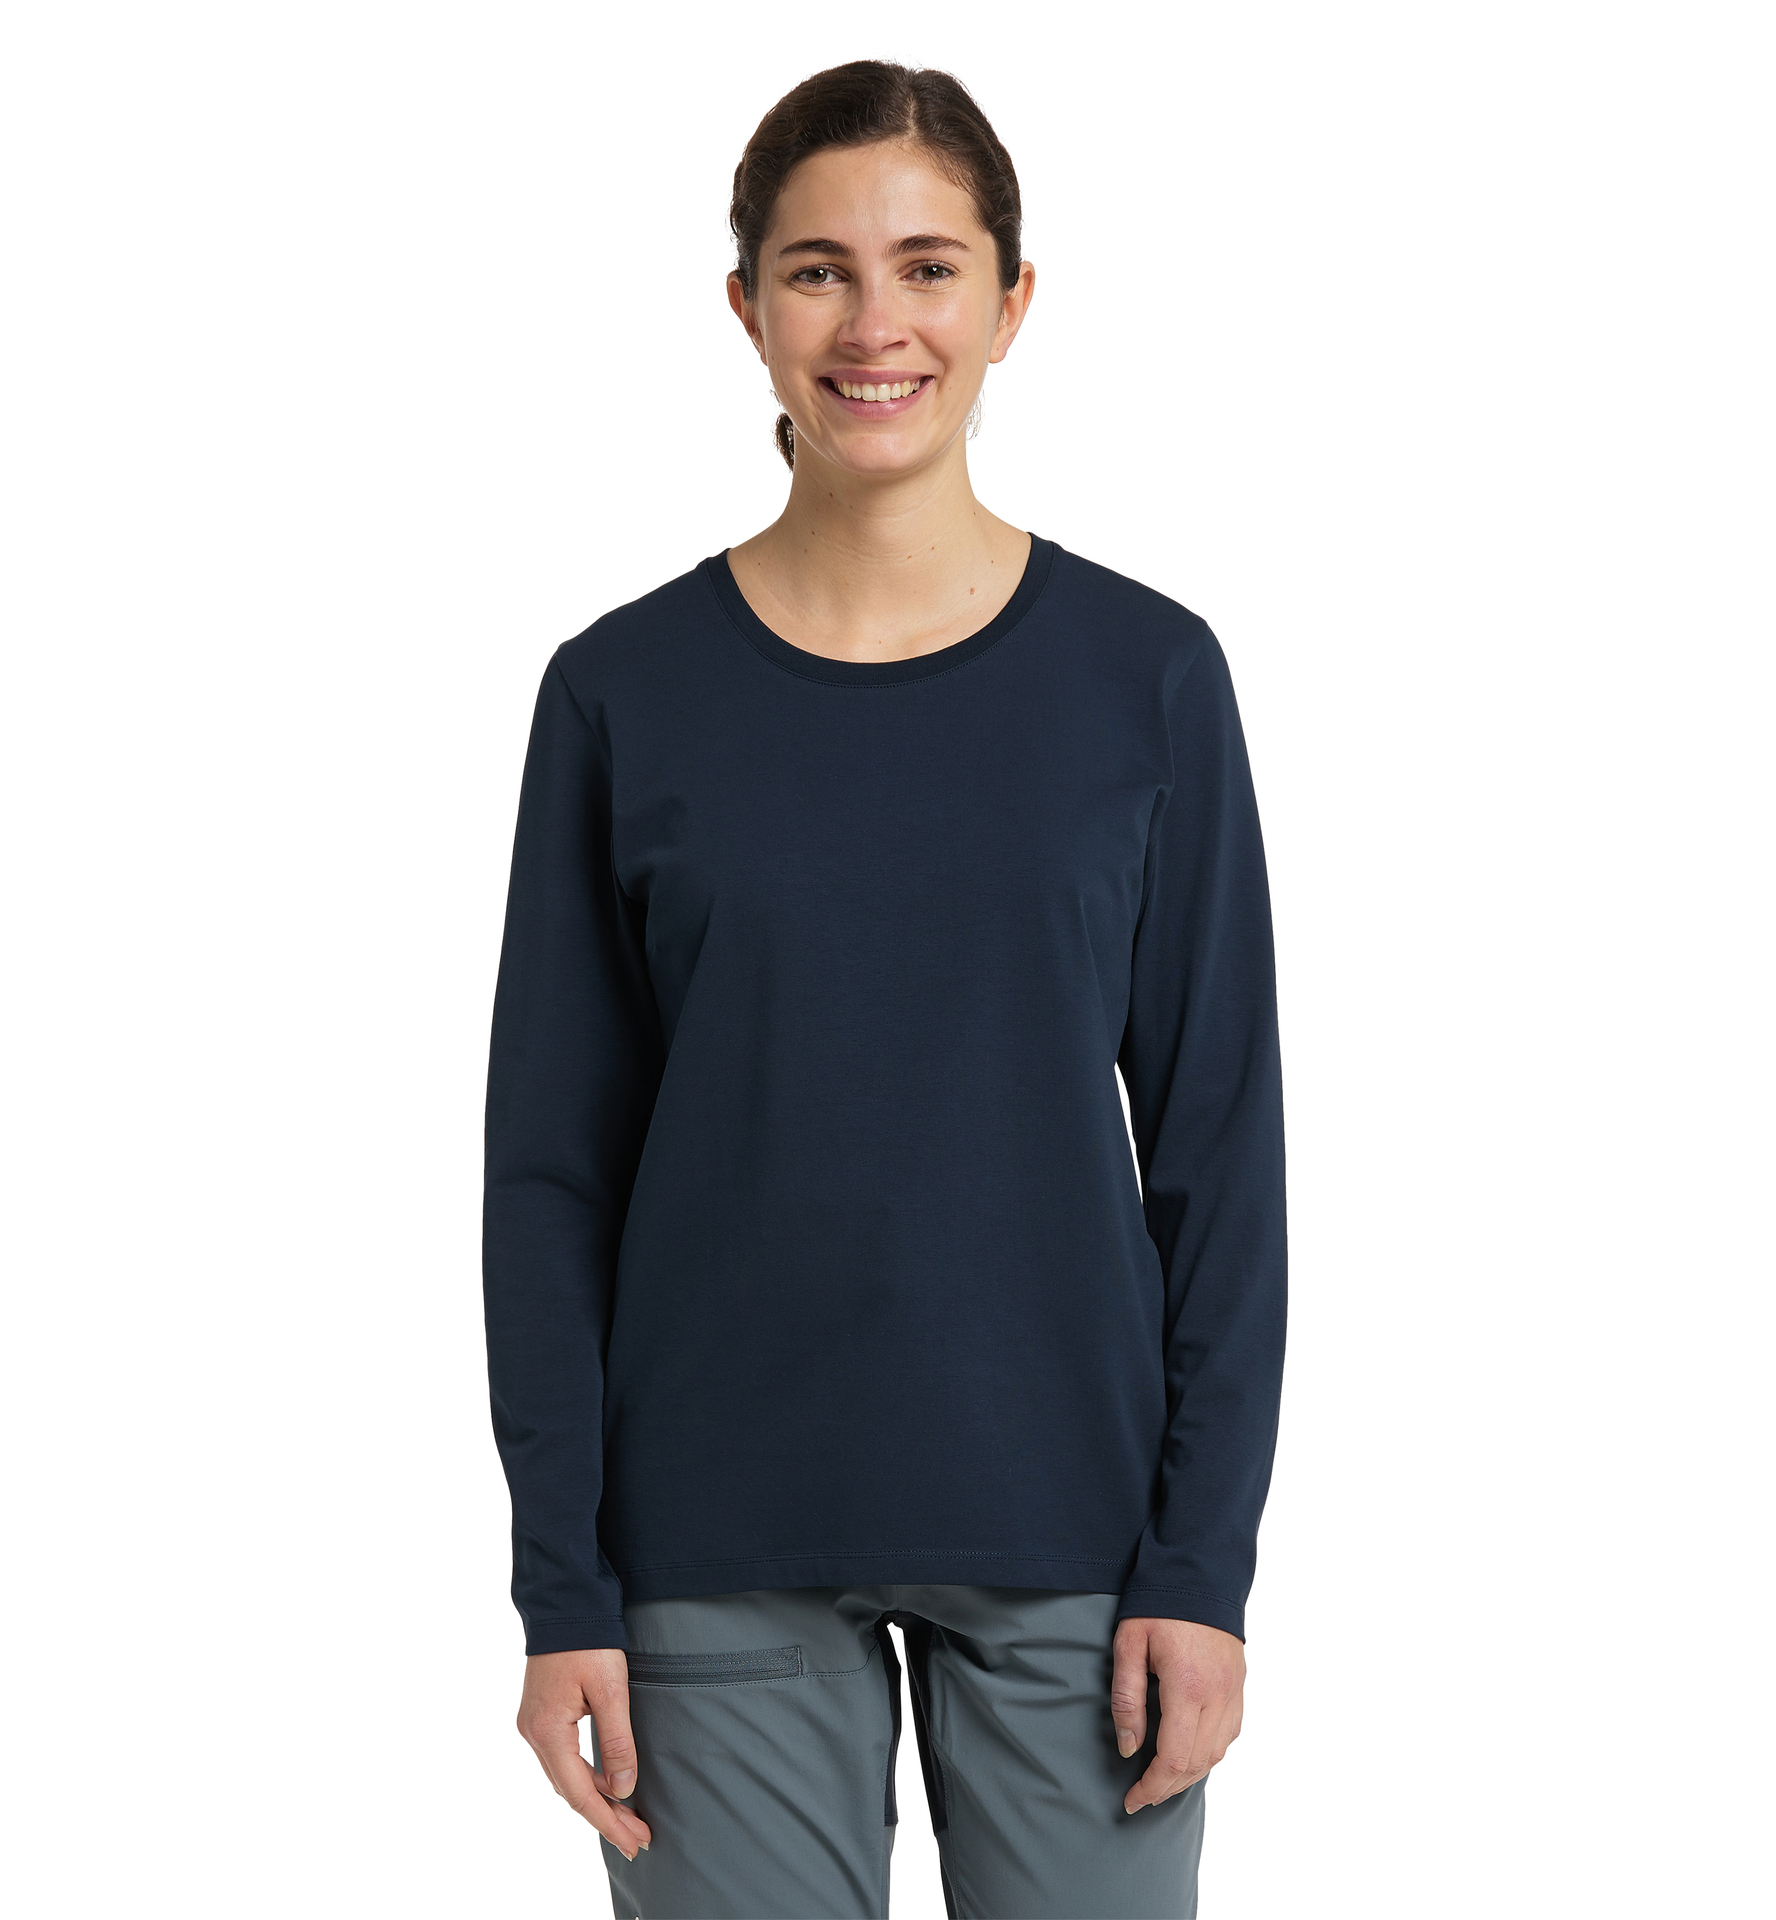 NAVY VERY COOL NEW LAVALETTE +LONG SLEEVE T TEE SHIRT!____ 